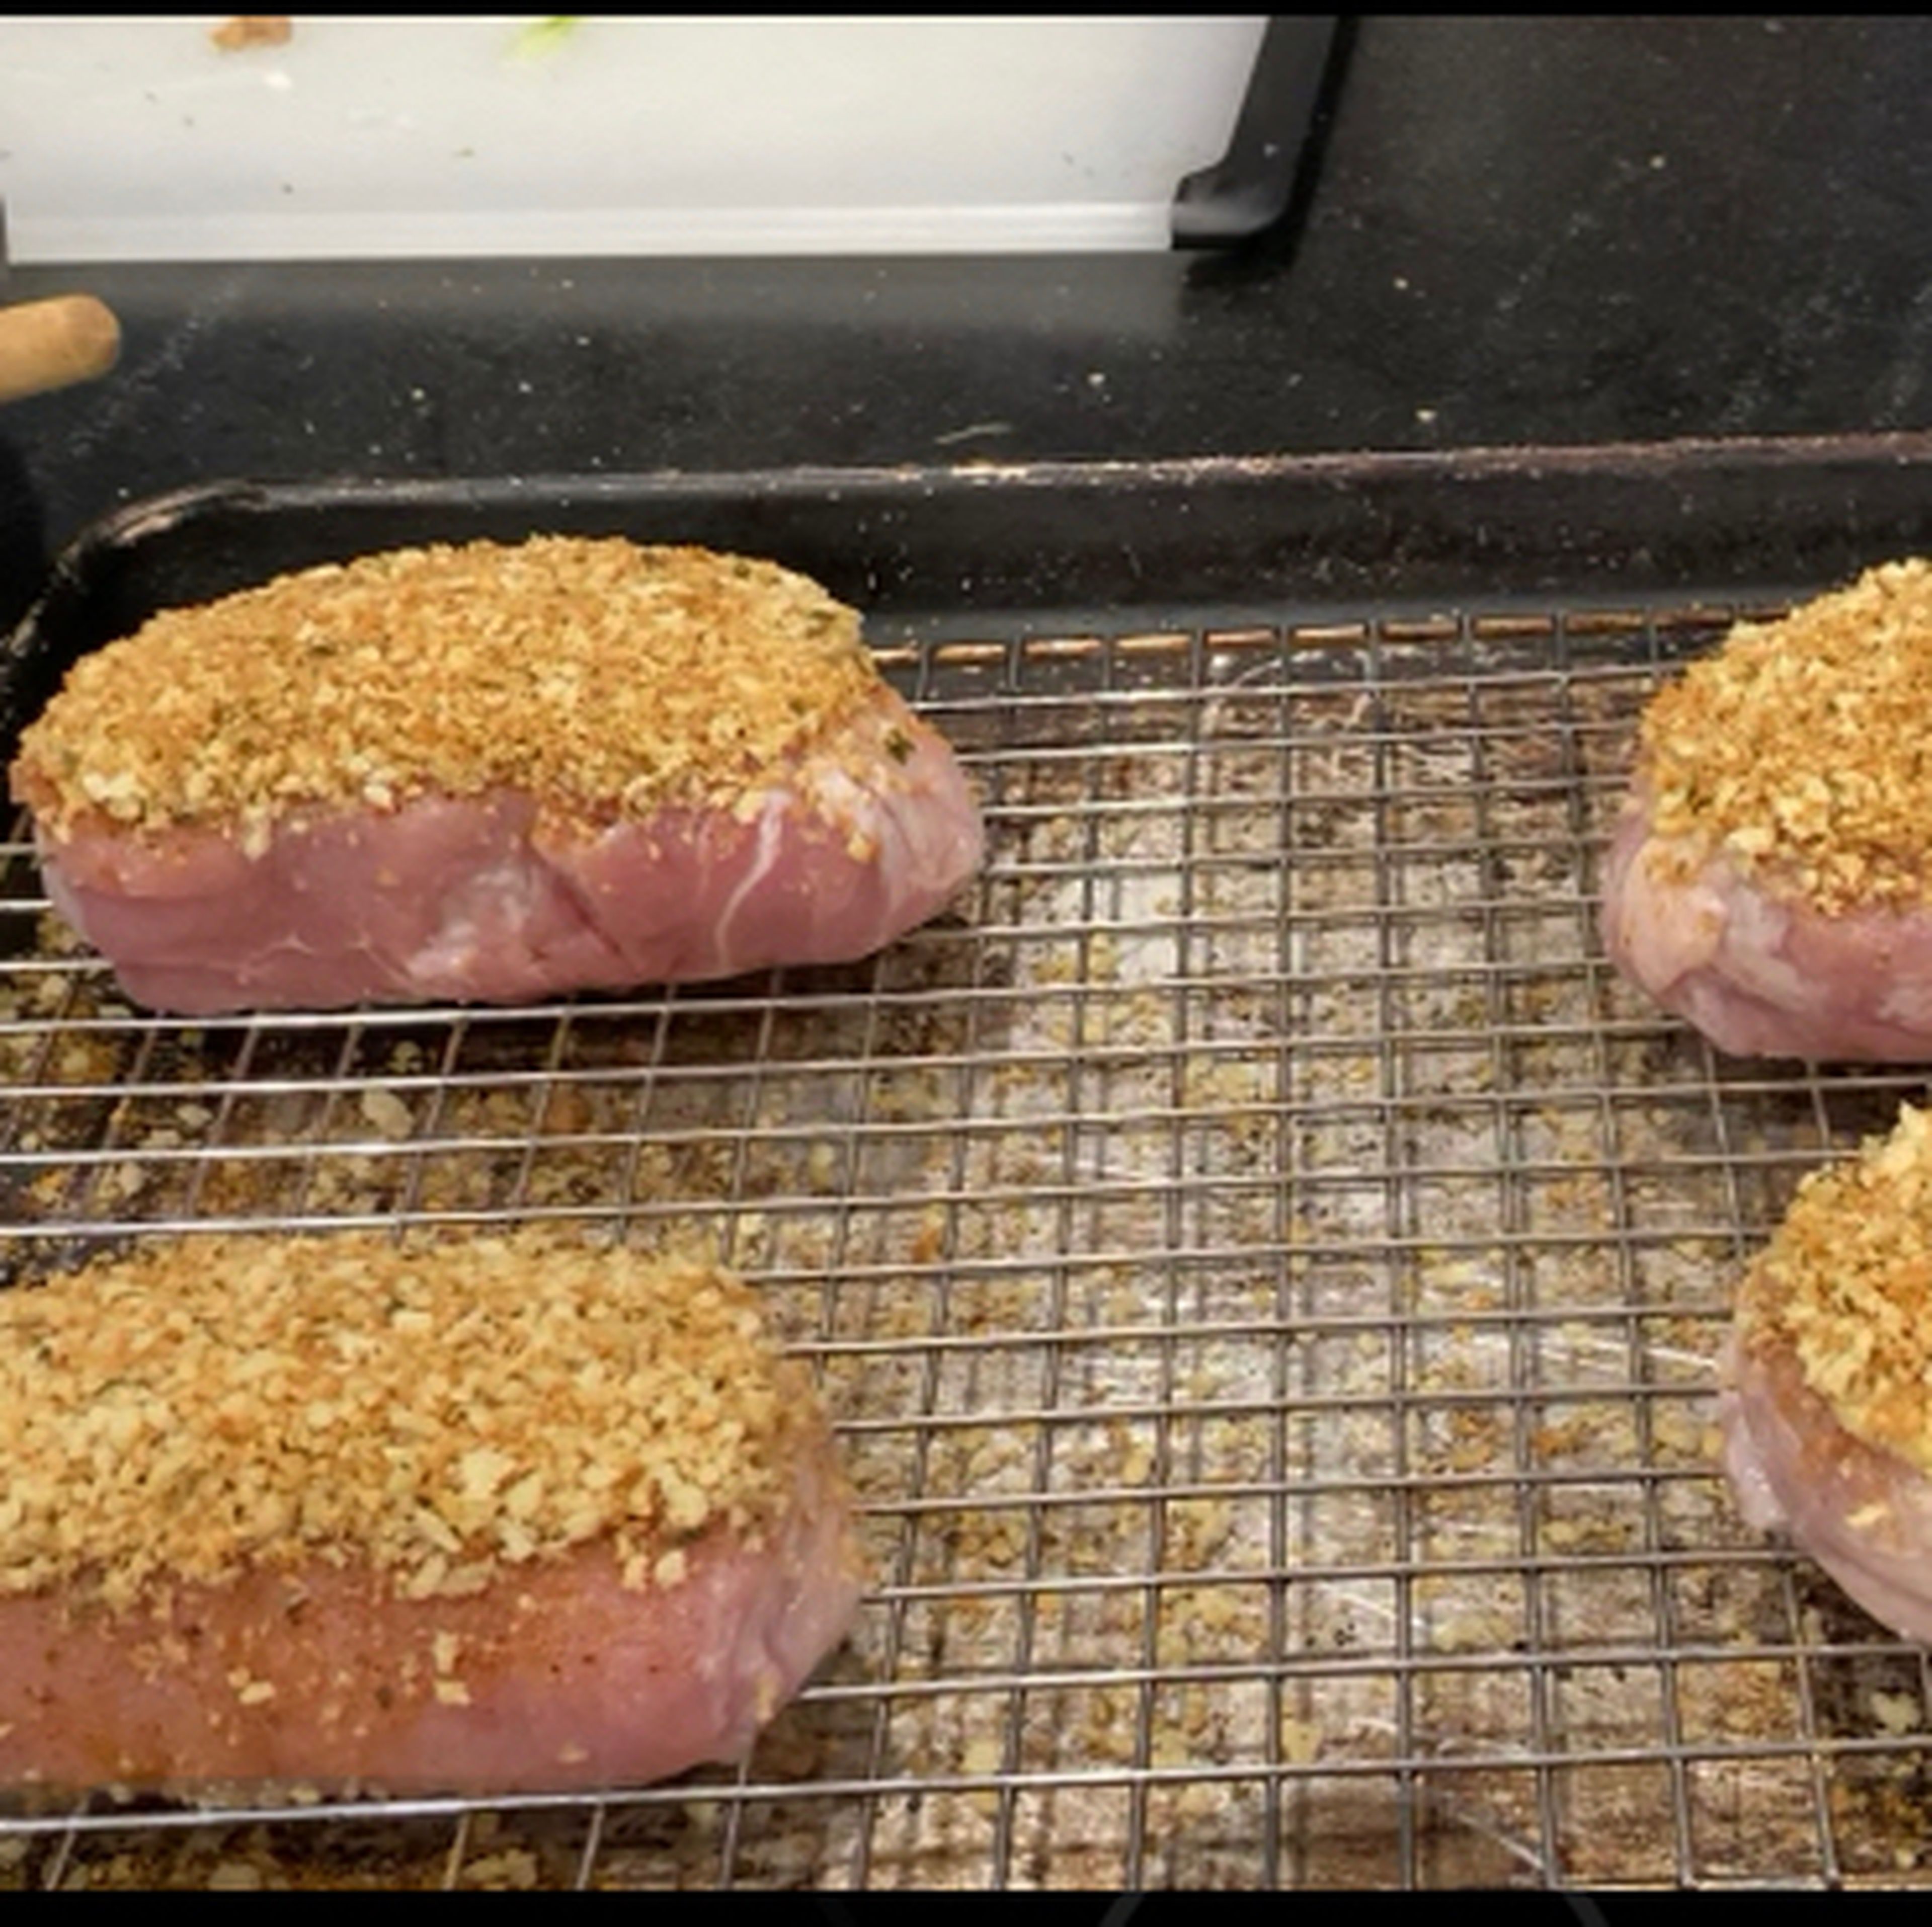 Next put the bread crumbs on each pork chop, again patting it gently to somewhat pack the bread crumbs. Then bake at 250 Degrees ￼Fahrenheit￼ for an hour or until the internal temperature is 150 Degrees￼Fahrenheit